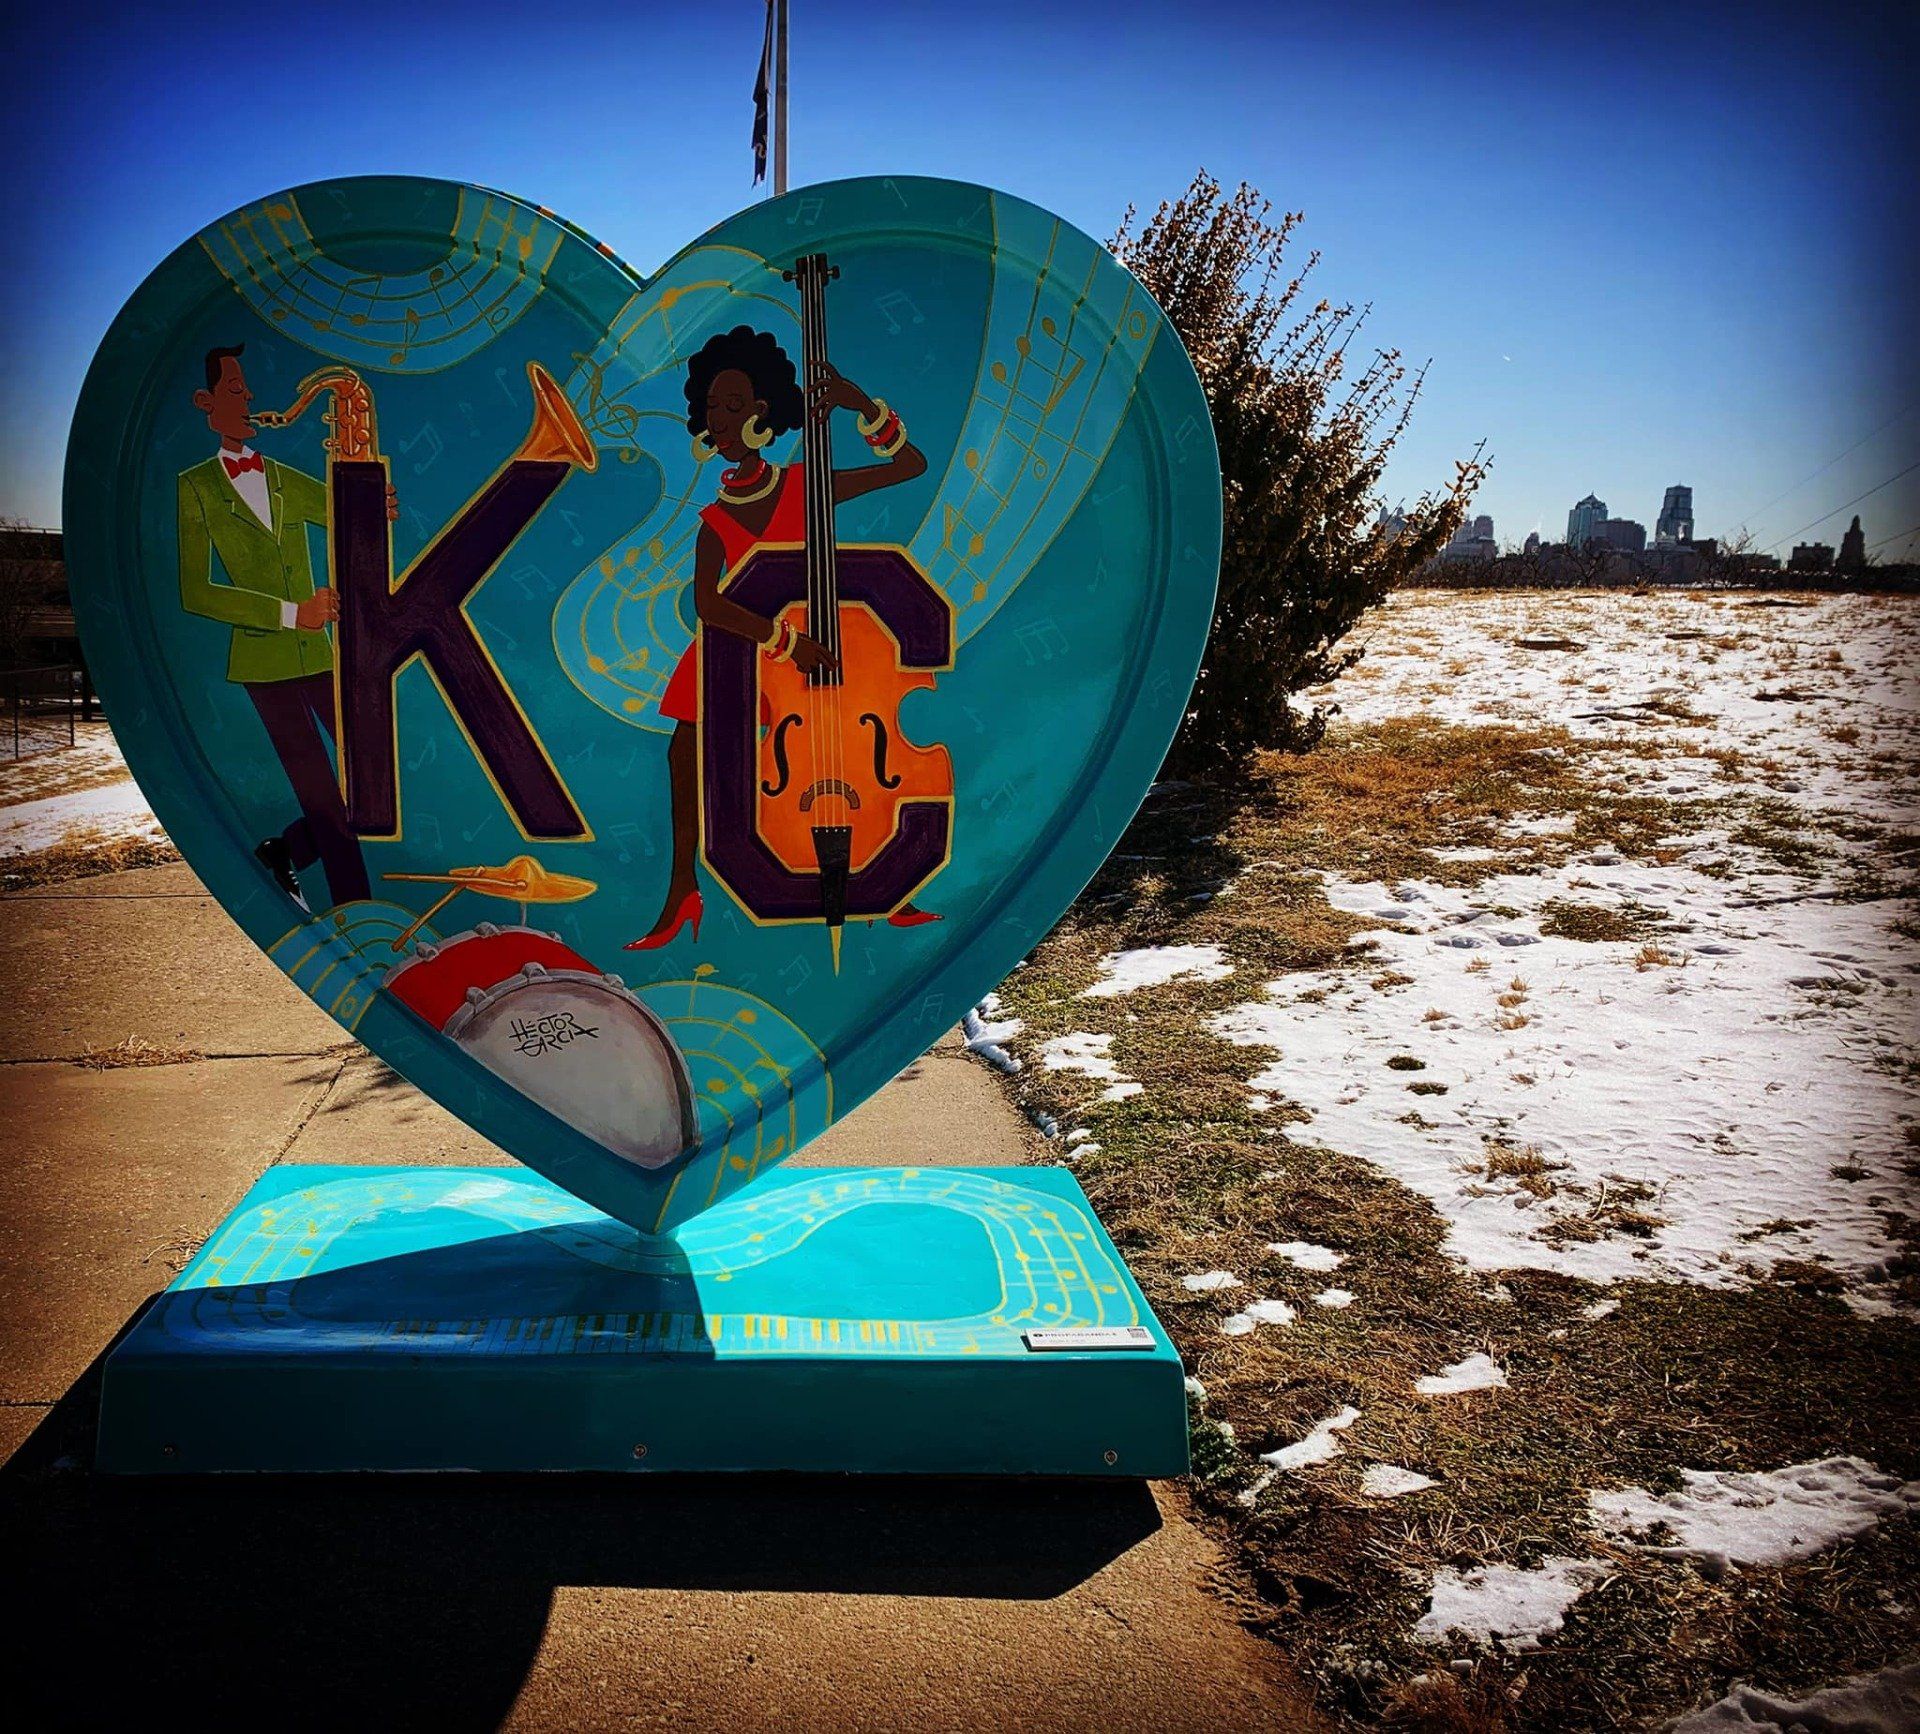 Parade Hearts - This heart is located at St. John's Park on Strawberry Hill in KCK